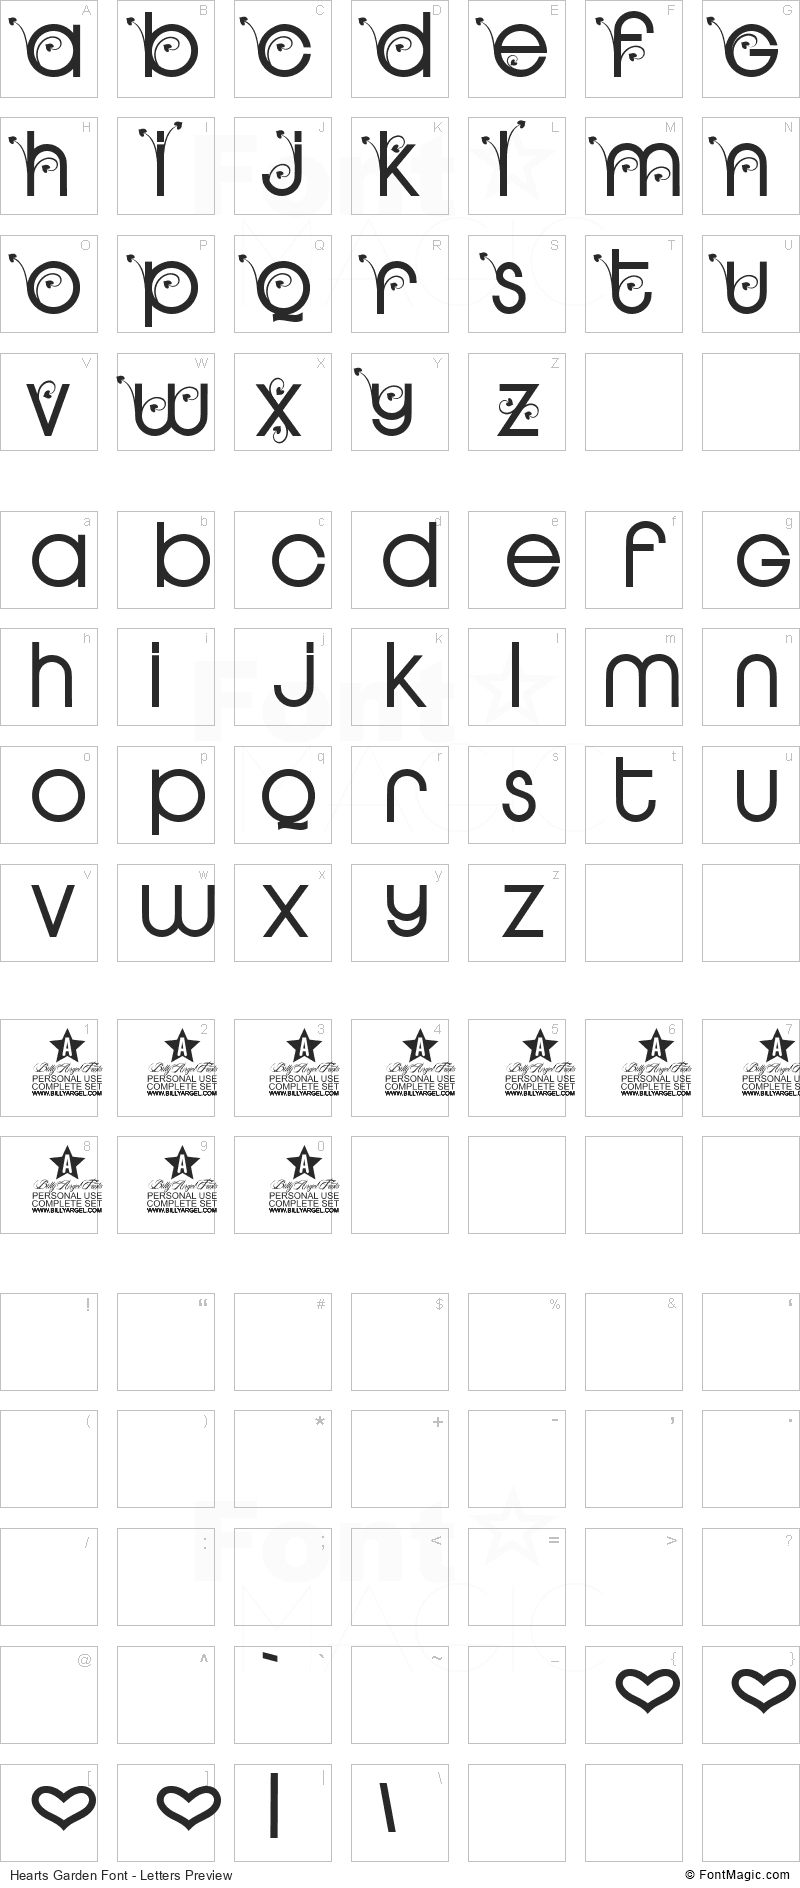 Hearts Garden Font - All Latters Preview Chart